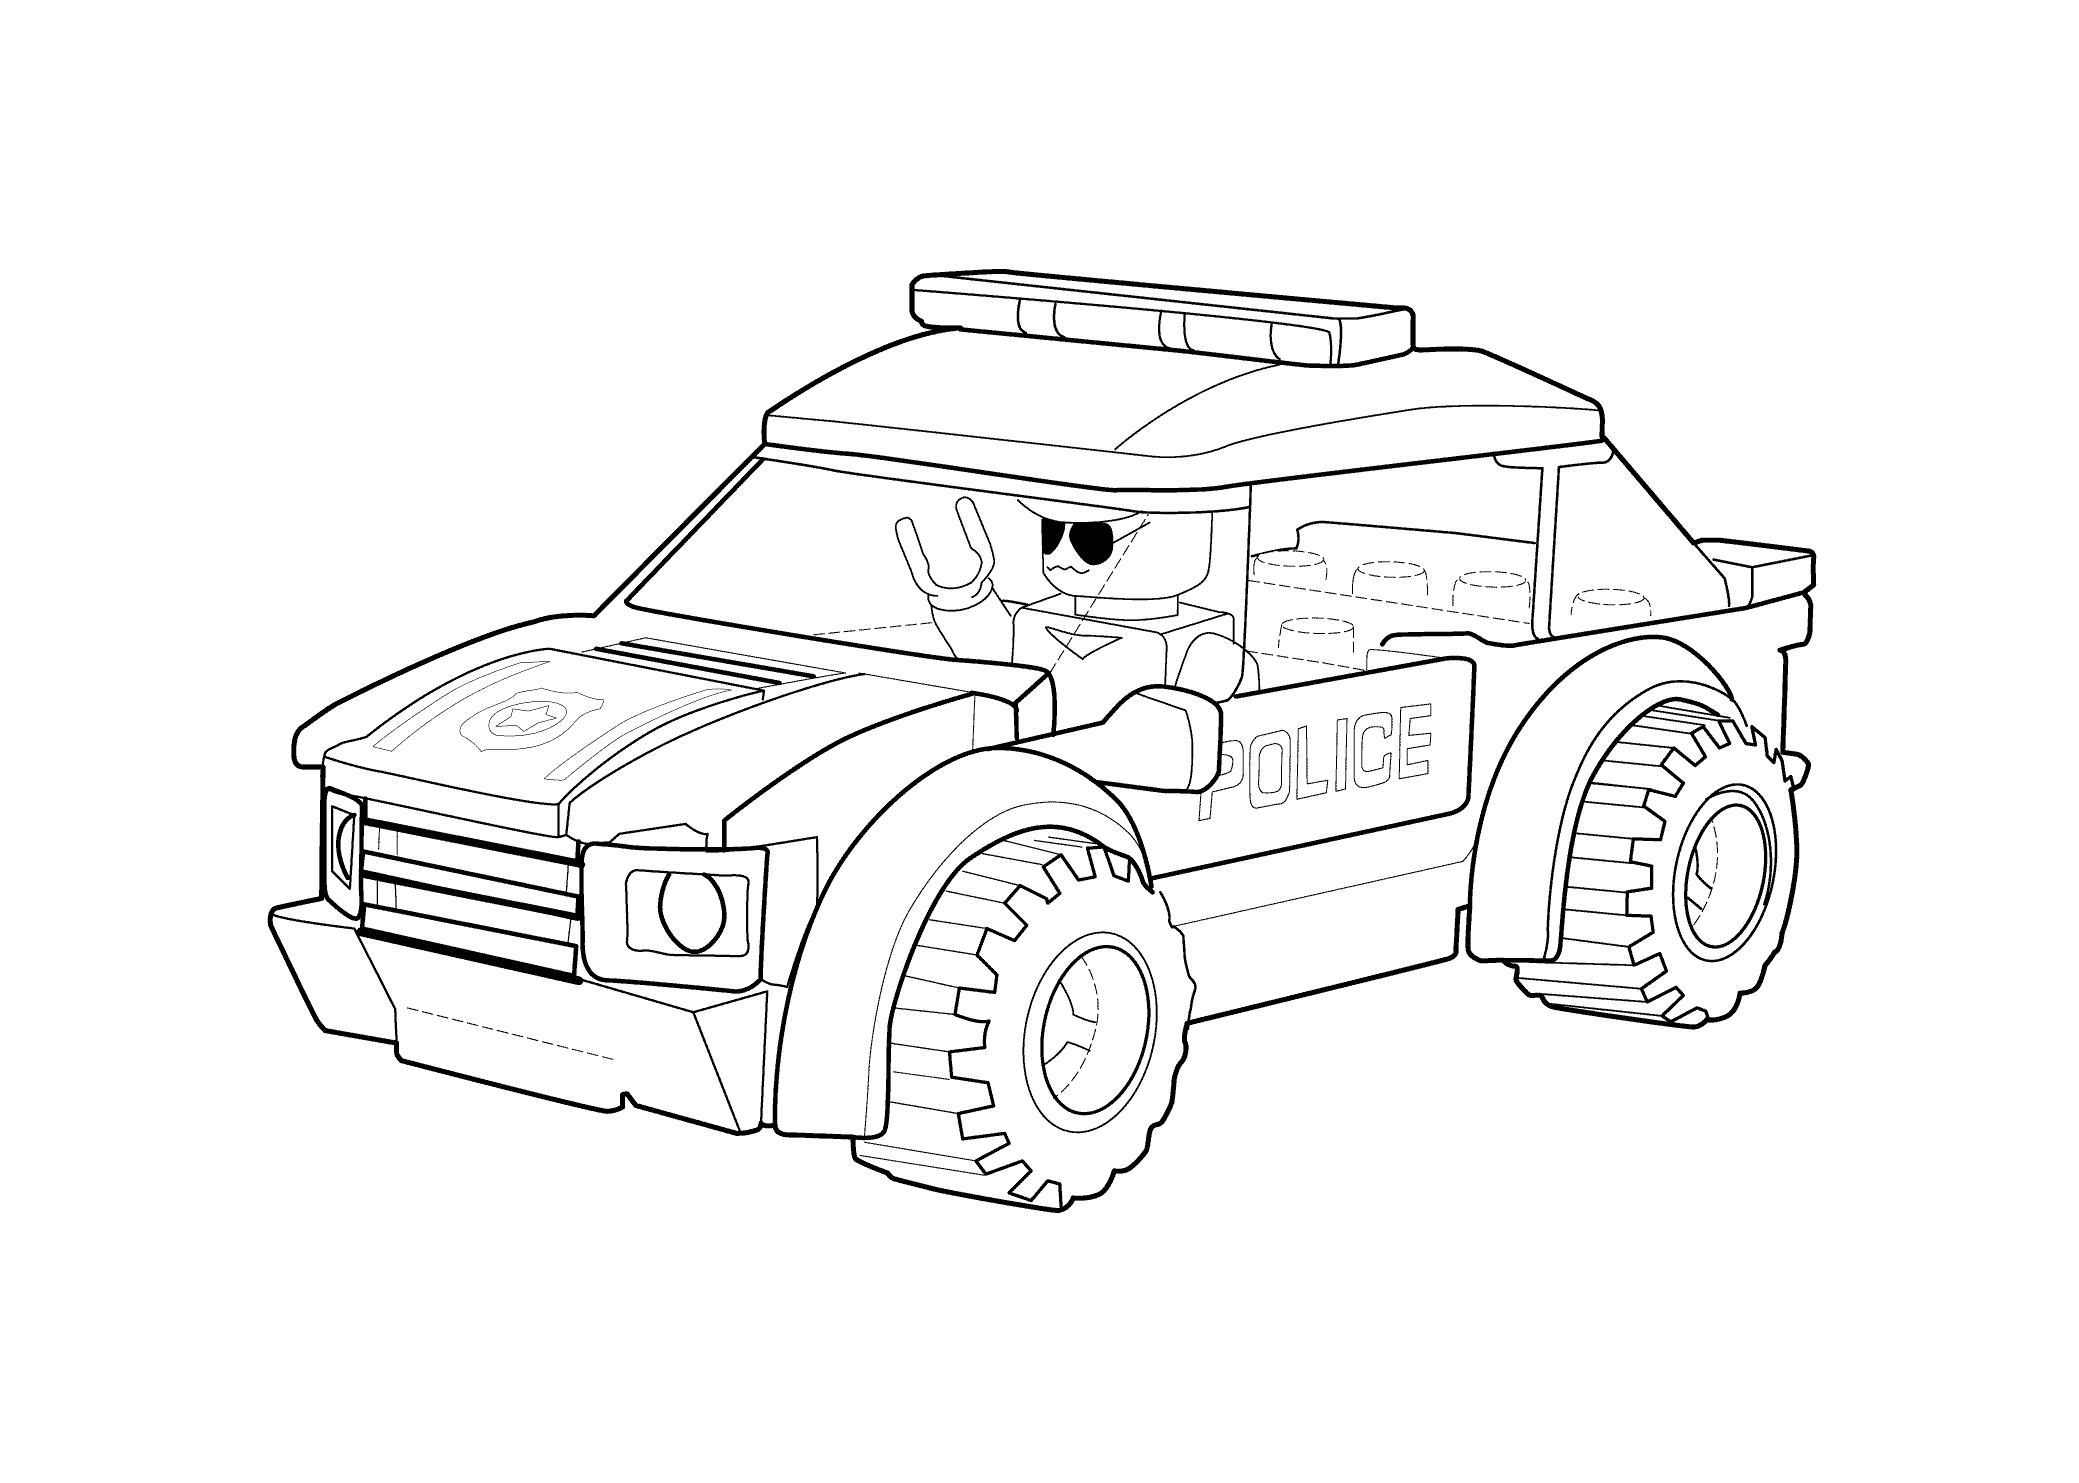 coloring pages of legos lego coloring pages best coloring pages for kids legos of coloring pages 